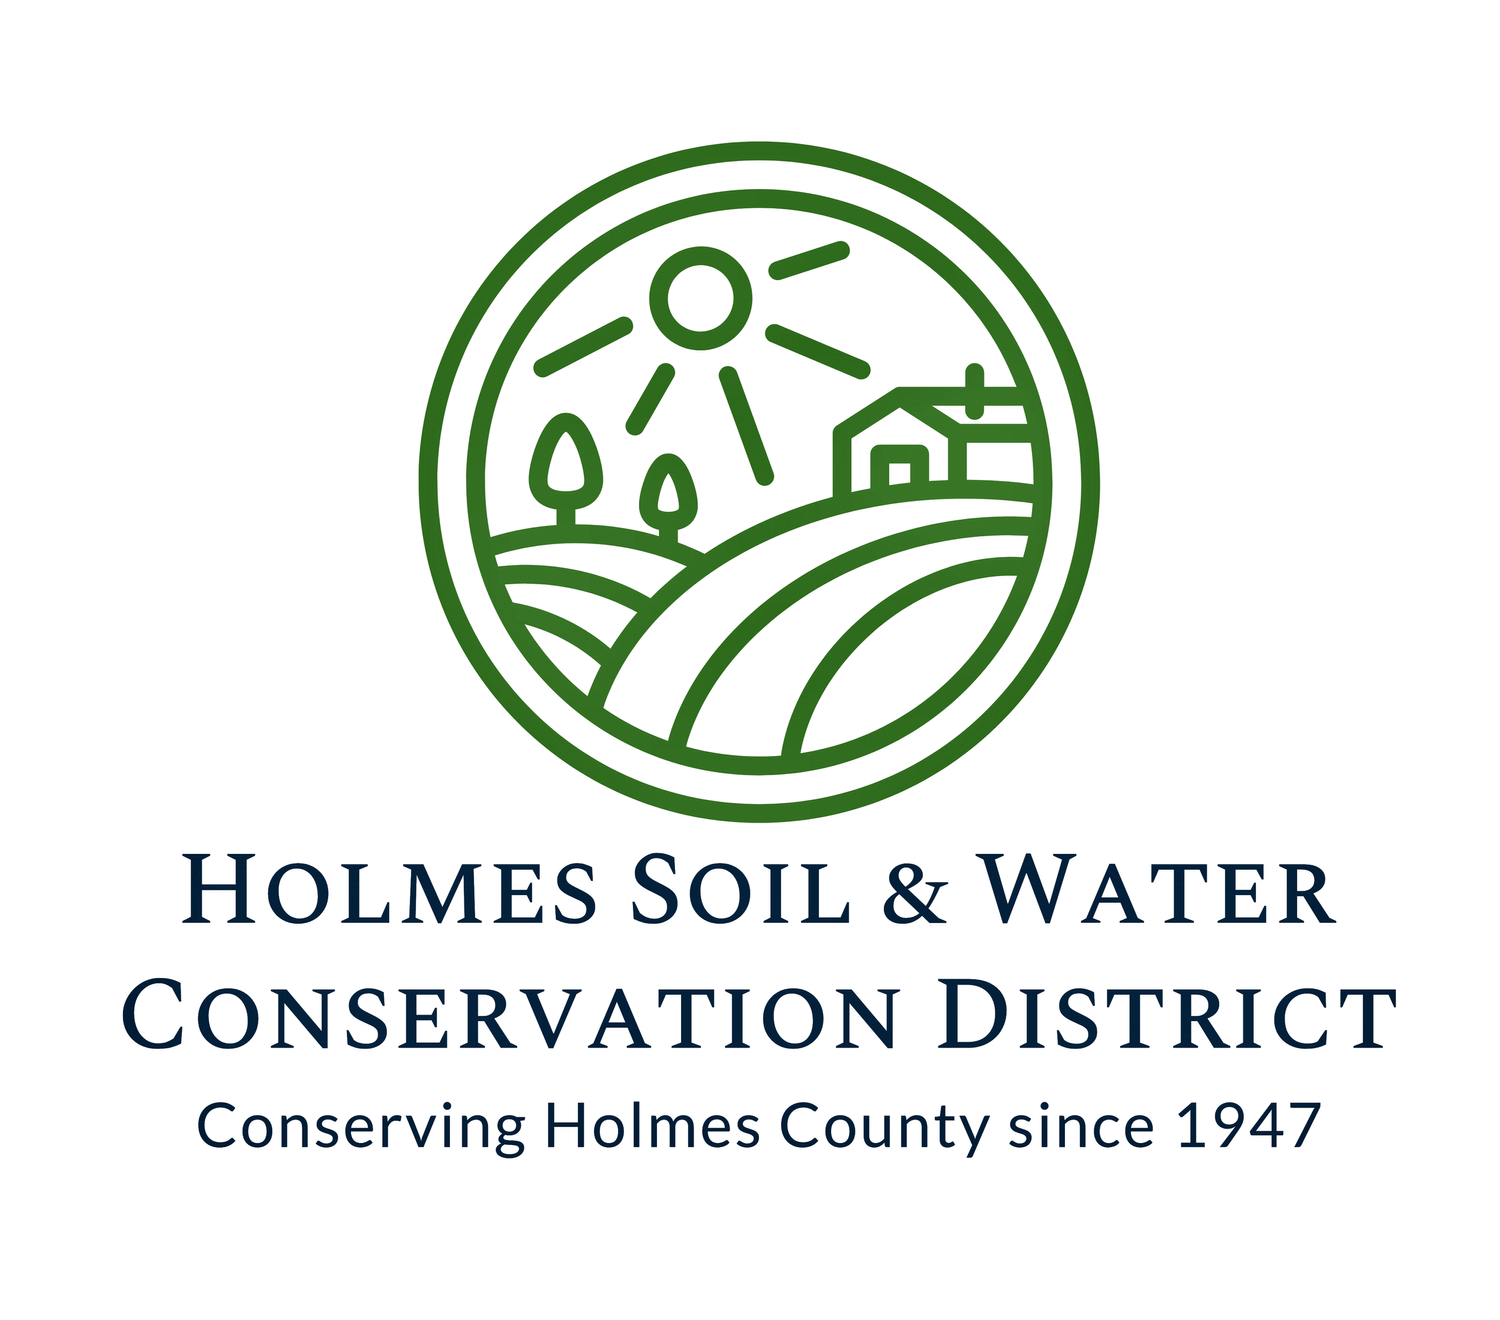 Holmes Soil & Water Conservation District